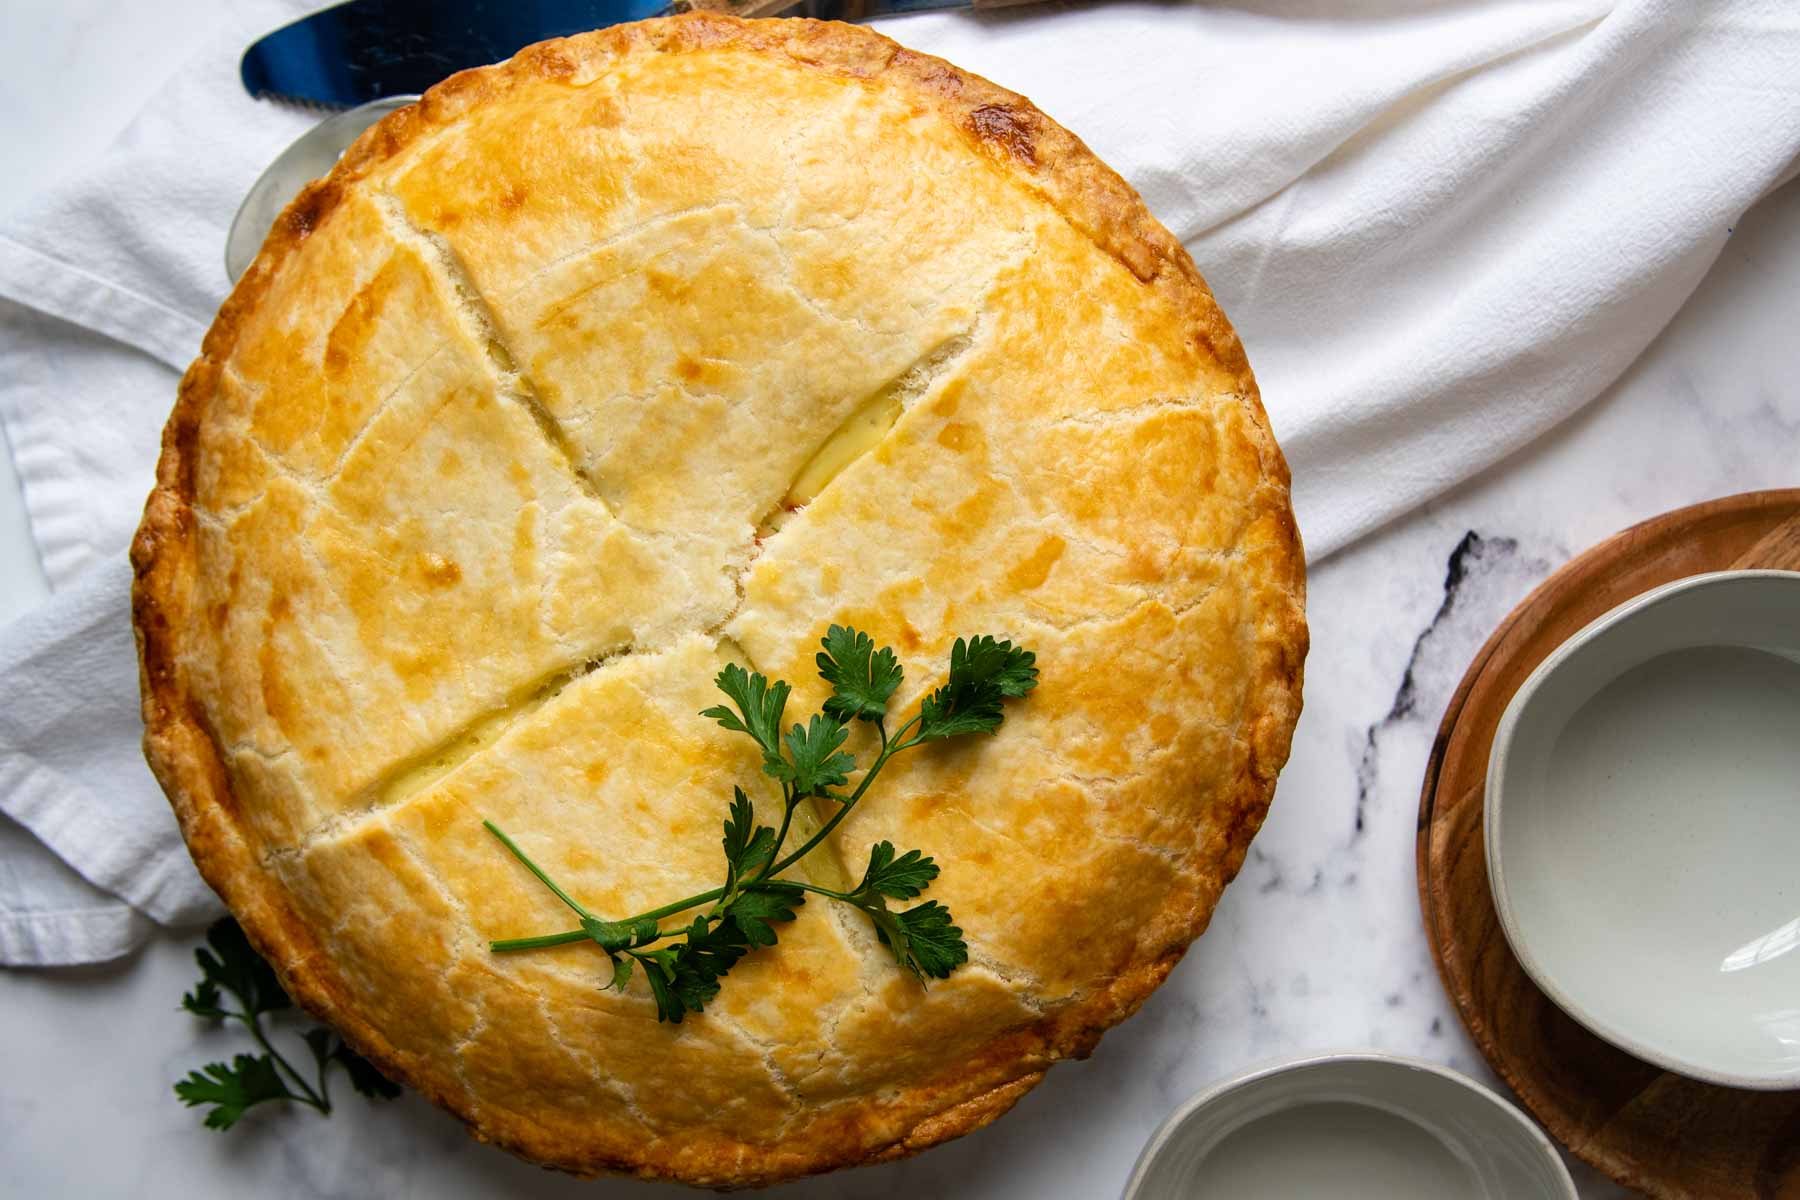 assembled uncut baked pot pie with fresh parsley on top